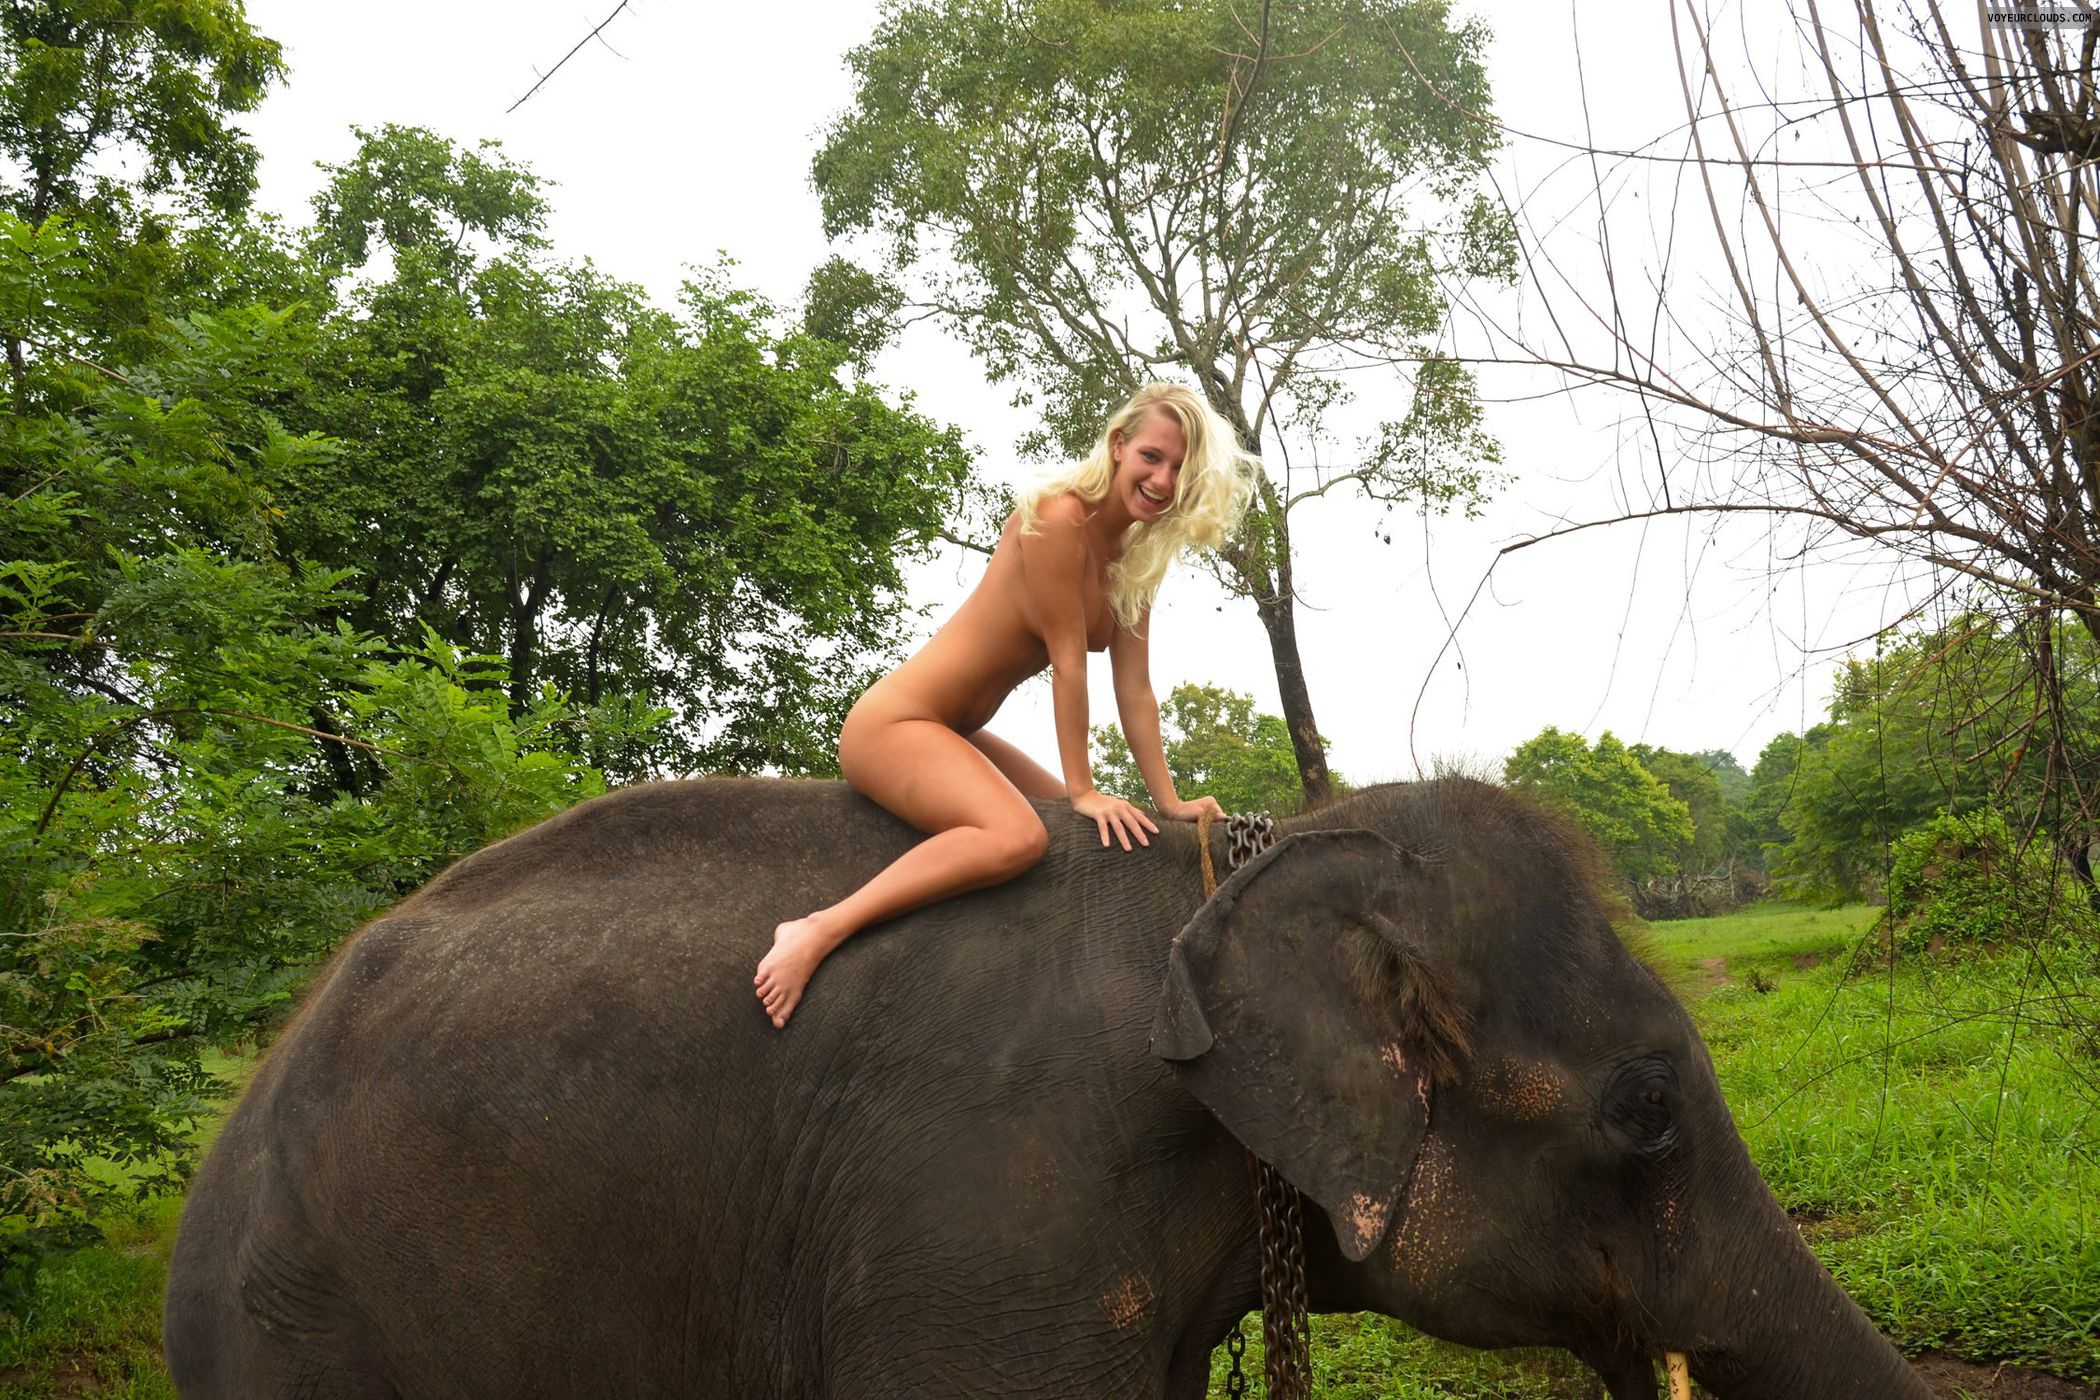 Best of Elephant and girl porn